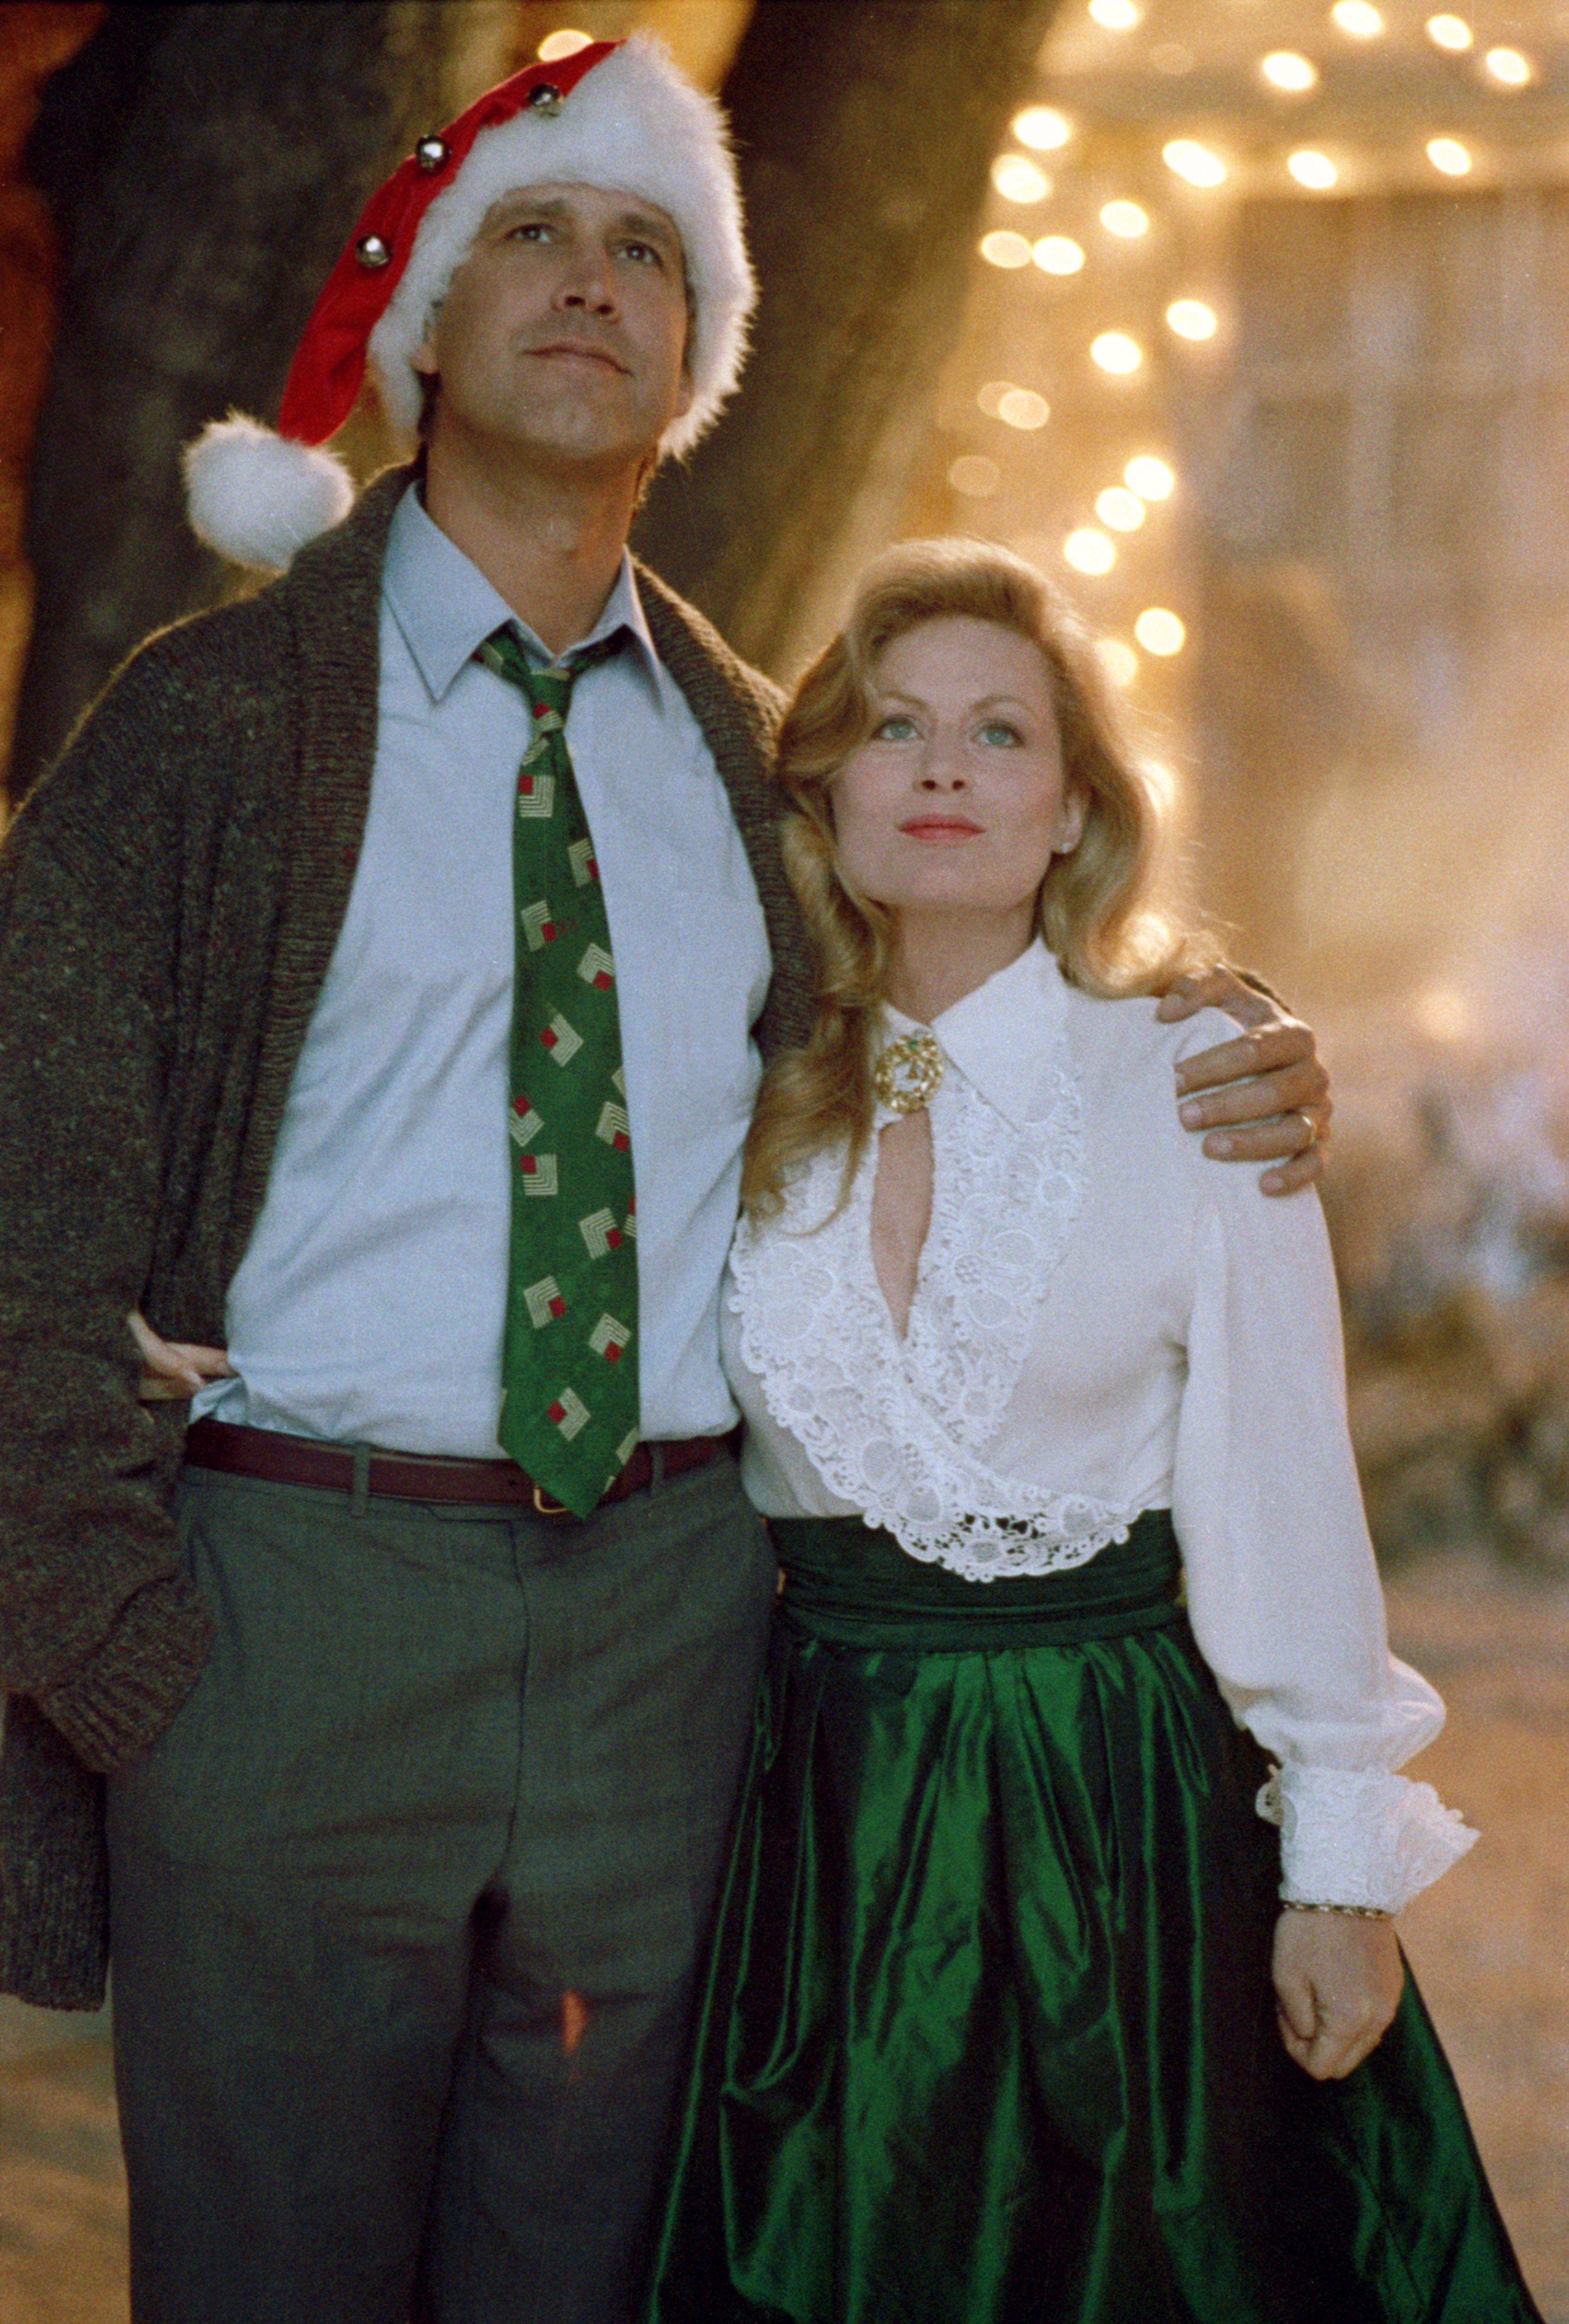 Beverly pictured with Chevy Chase in National Lampoon’s Christmas Vacation